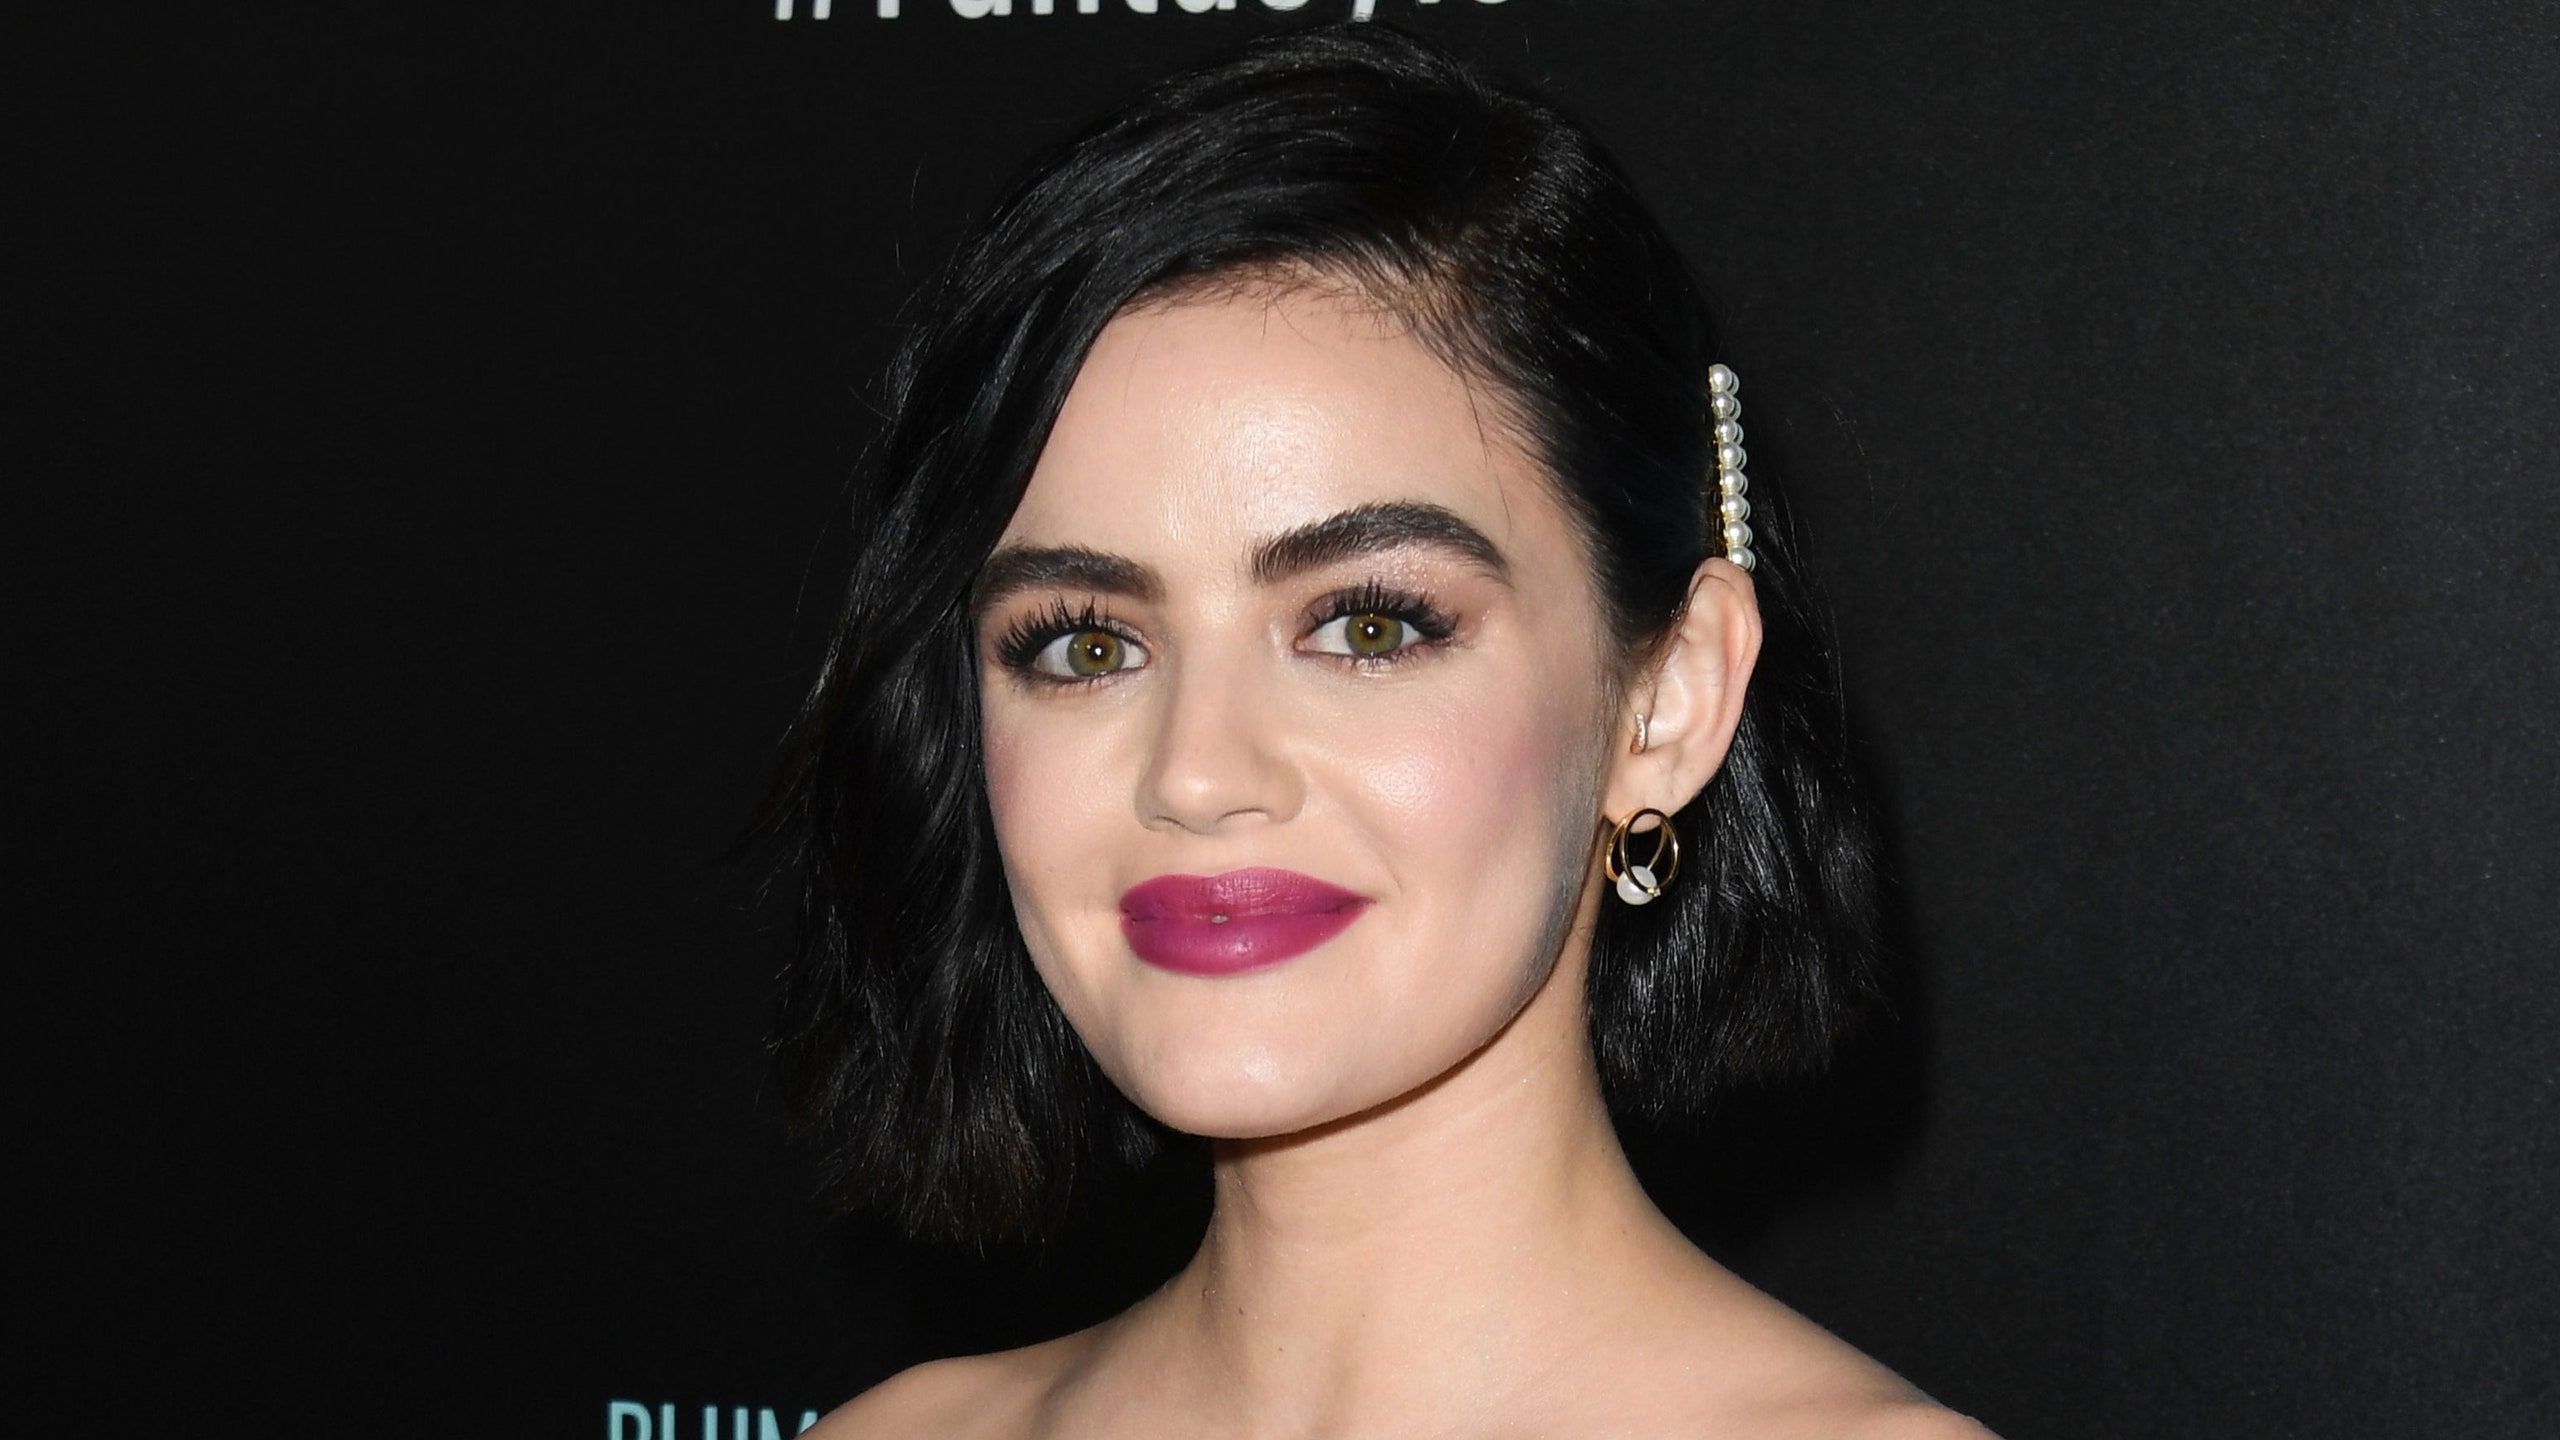 Lucy Hale Revealed Photo From When She Had Pencil Thin Eyebrows In High School